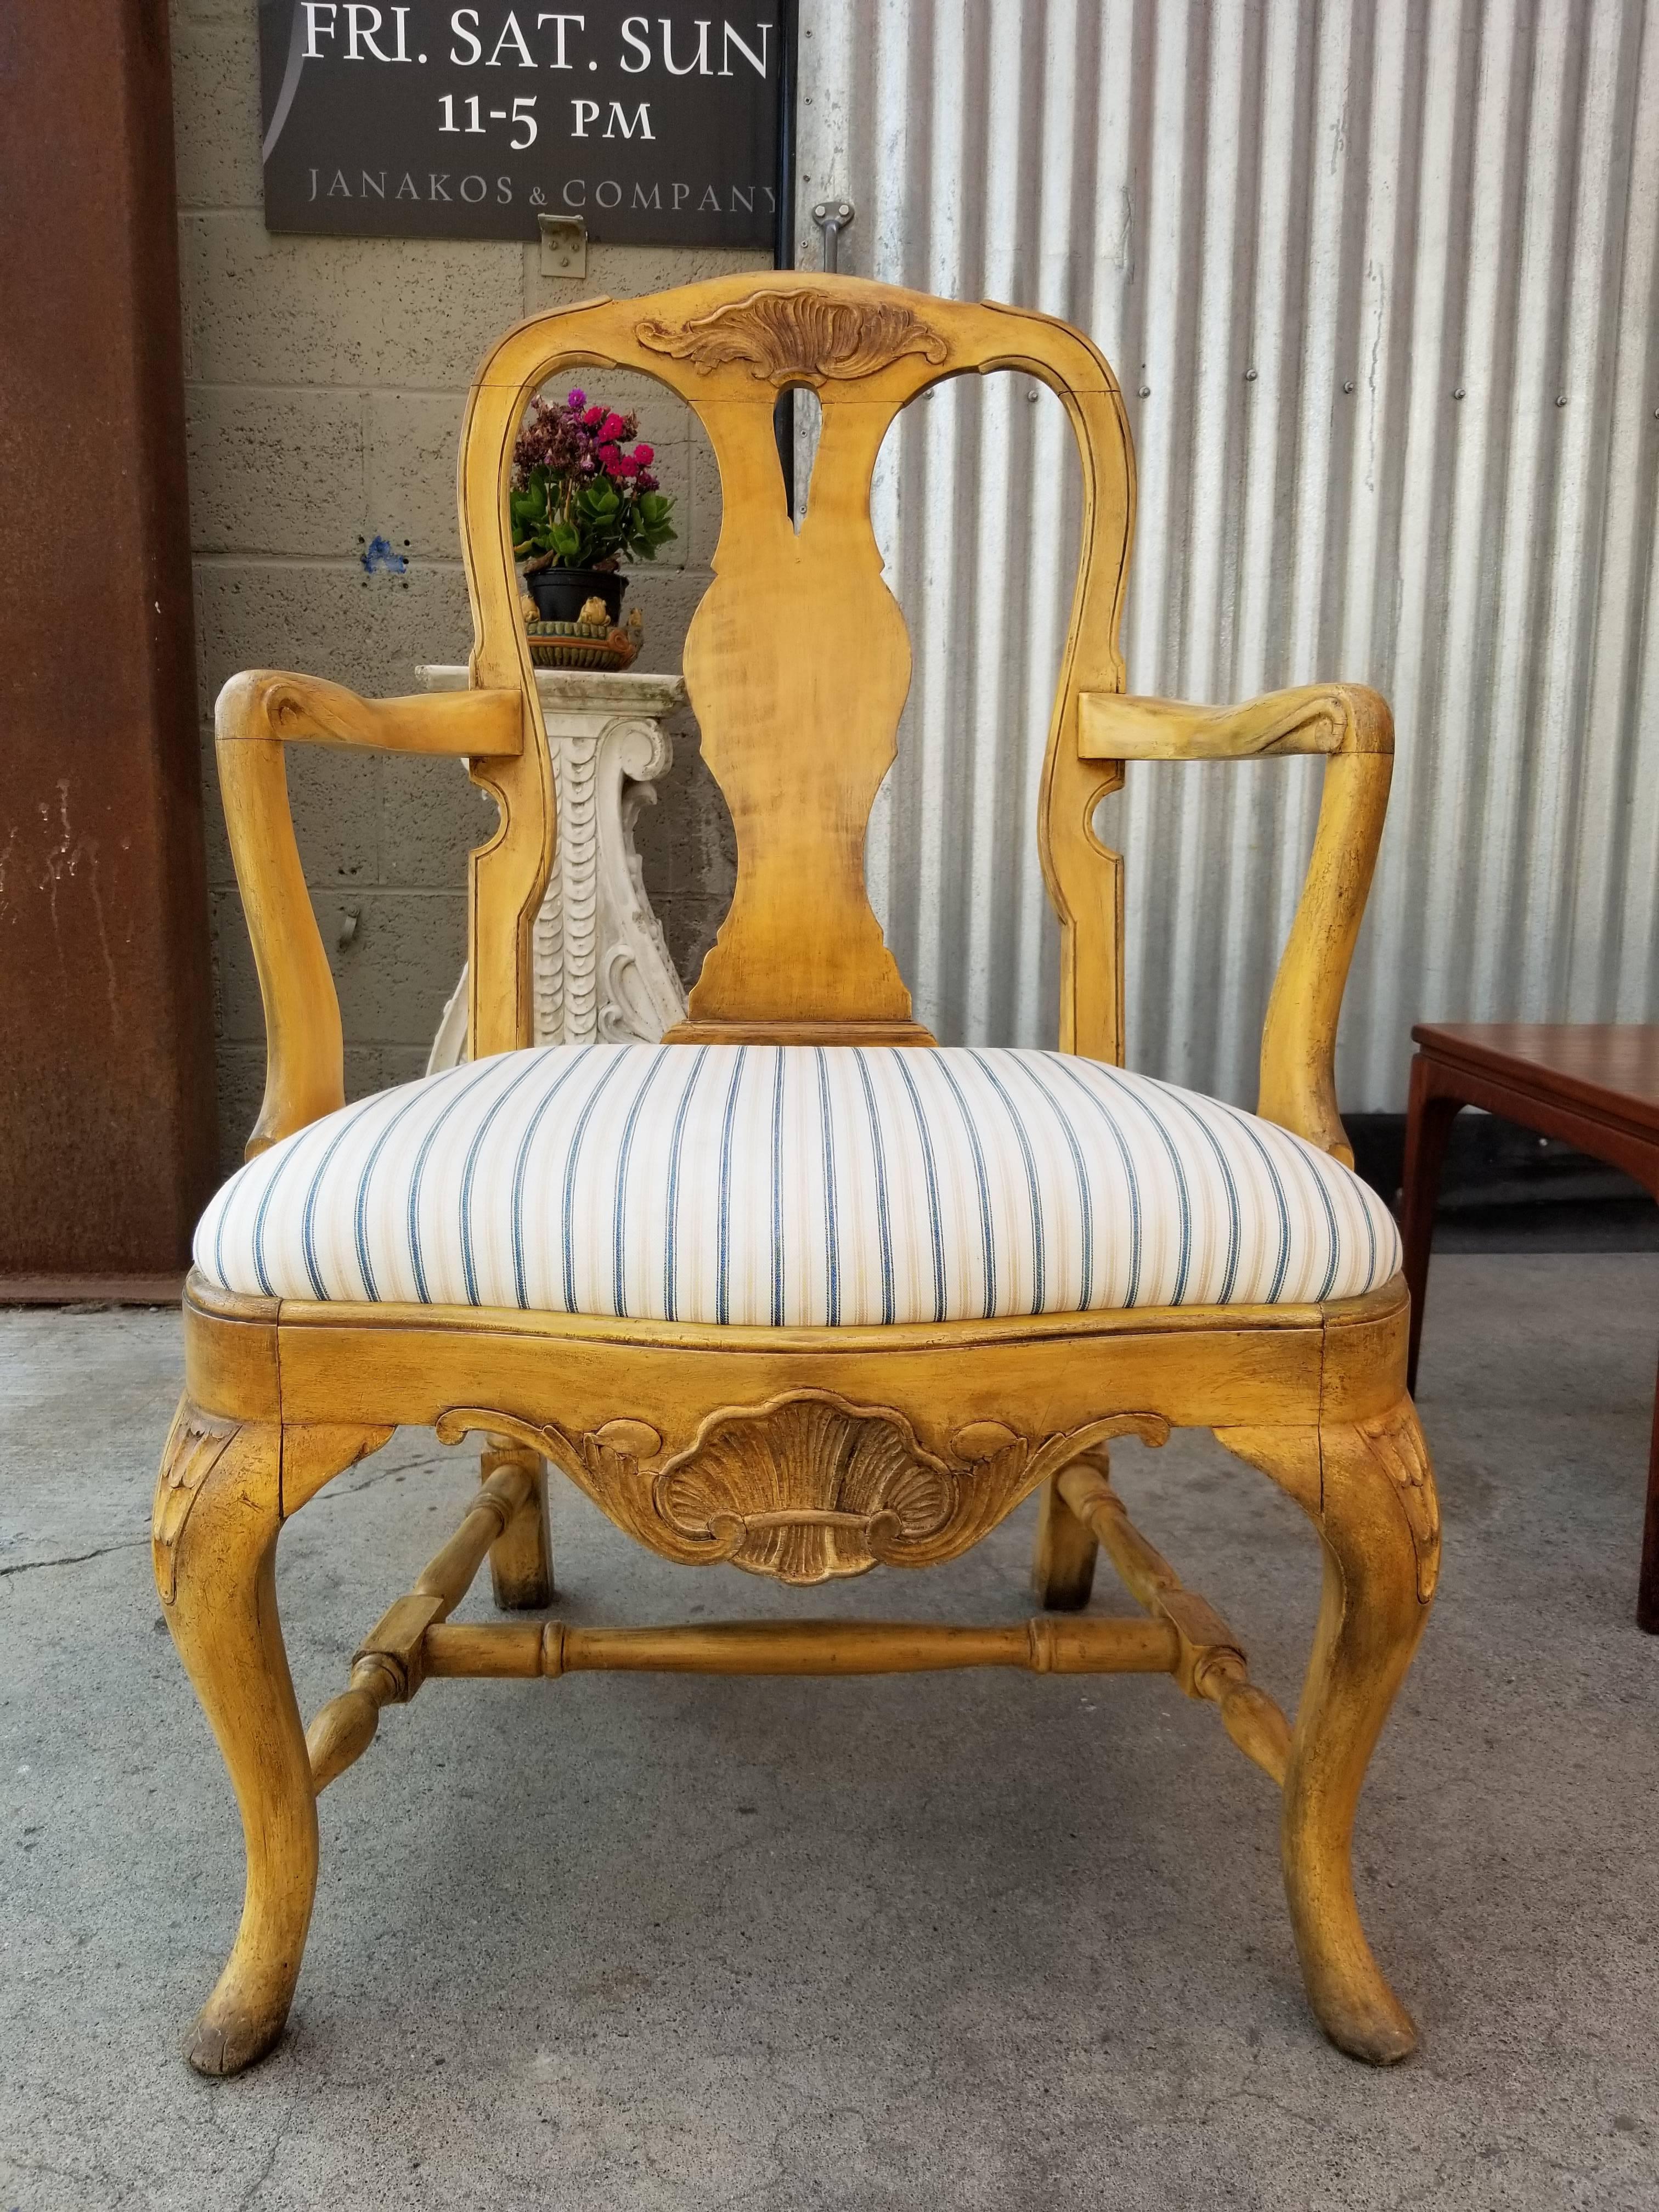 Early 20th century hand-carved Rococo style chair with painted surface. Quality and sturdy construction.